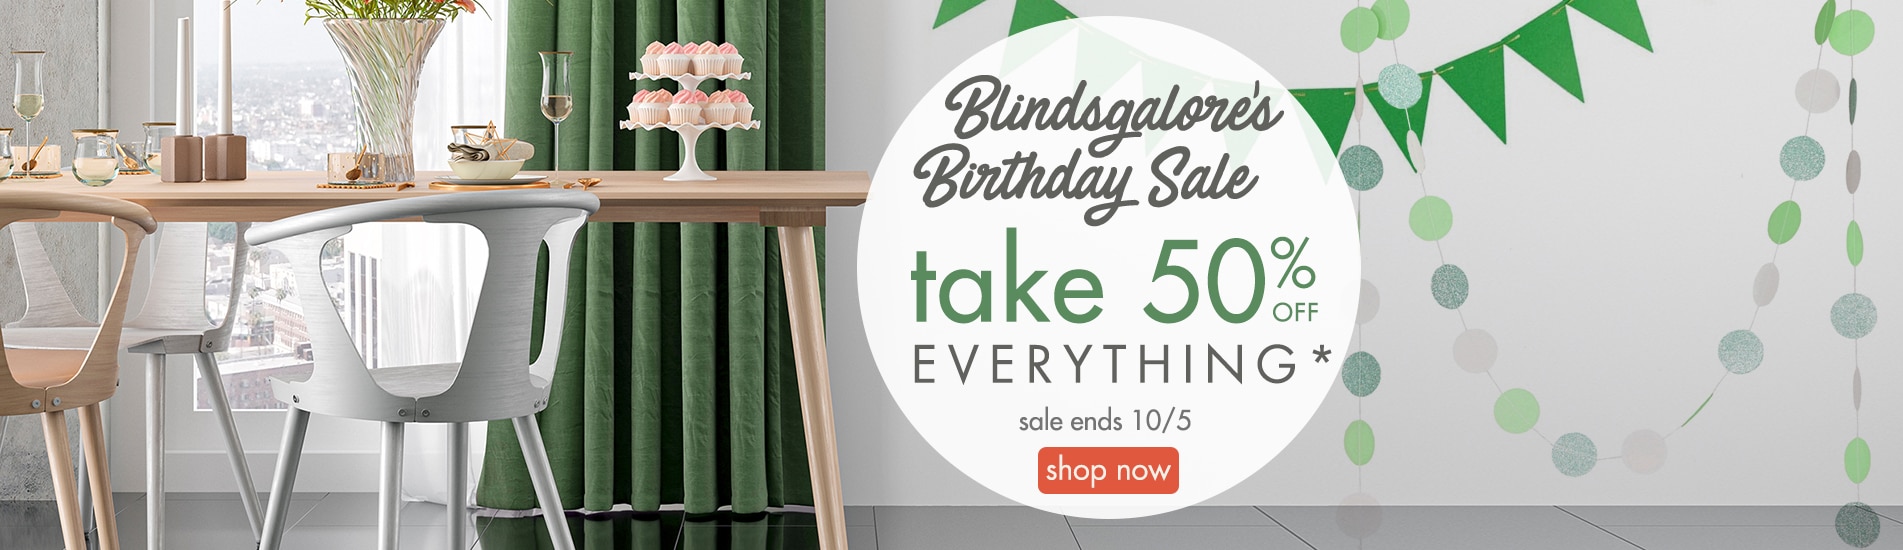 celebrate our birthday with us and take 50% off